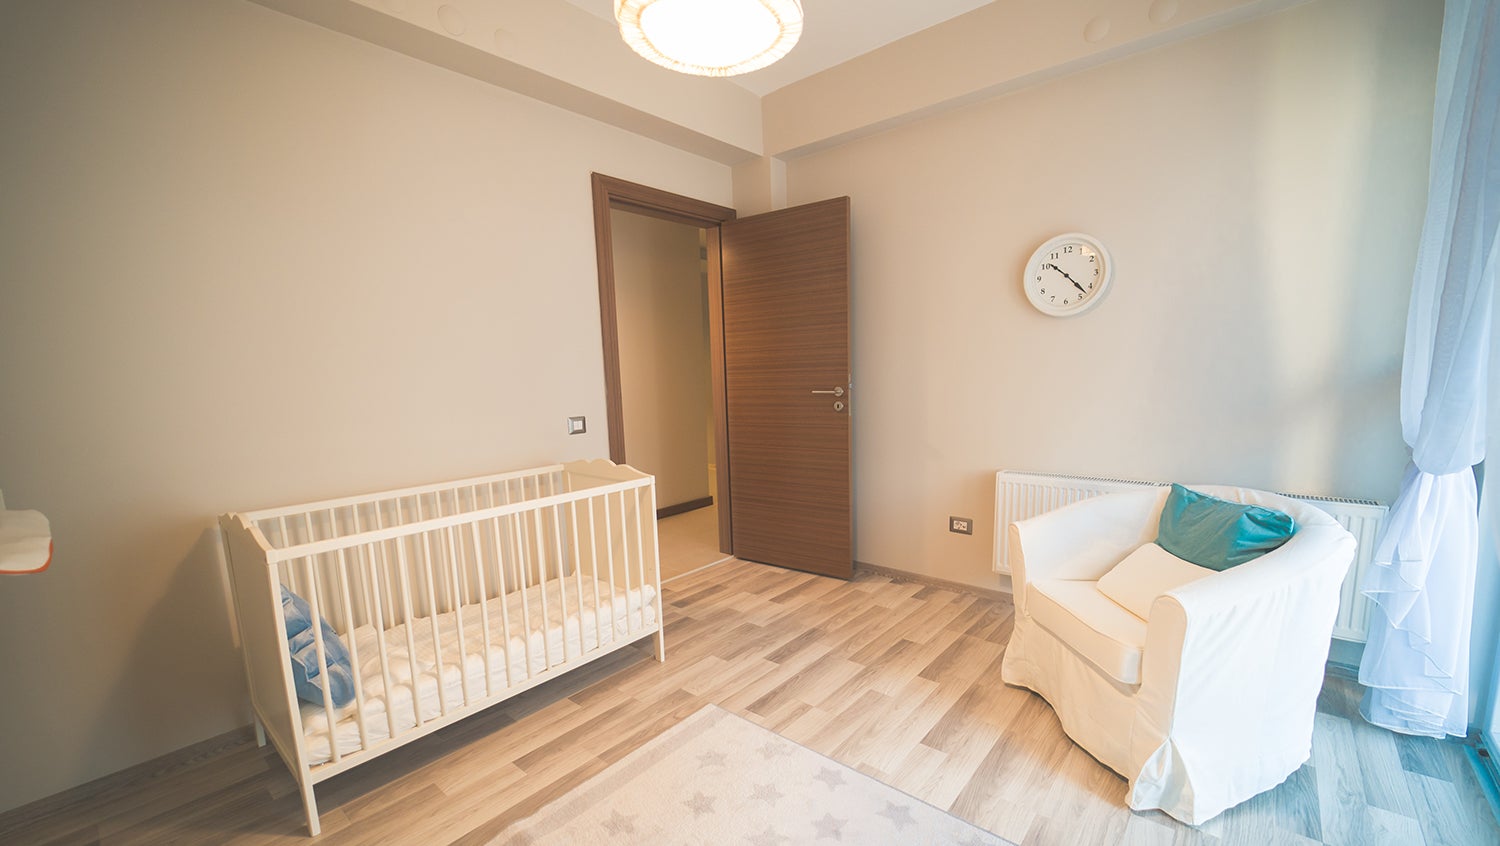 Empty nursery for expectant physician couple during COVID-19